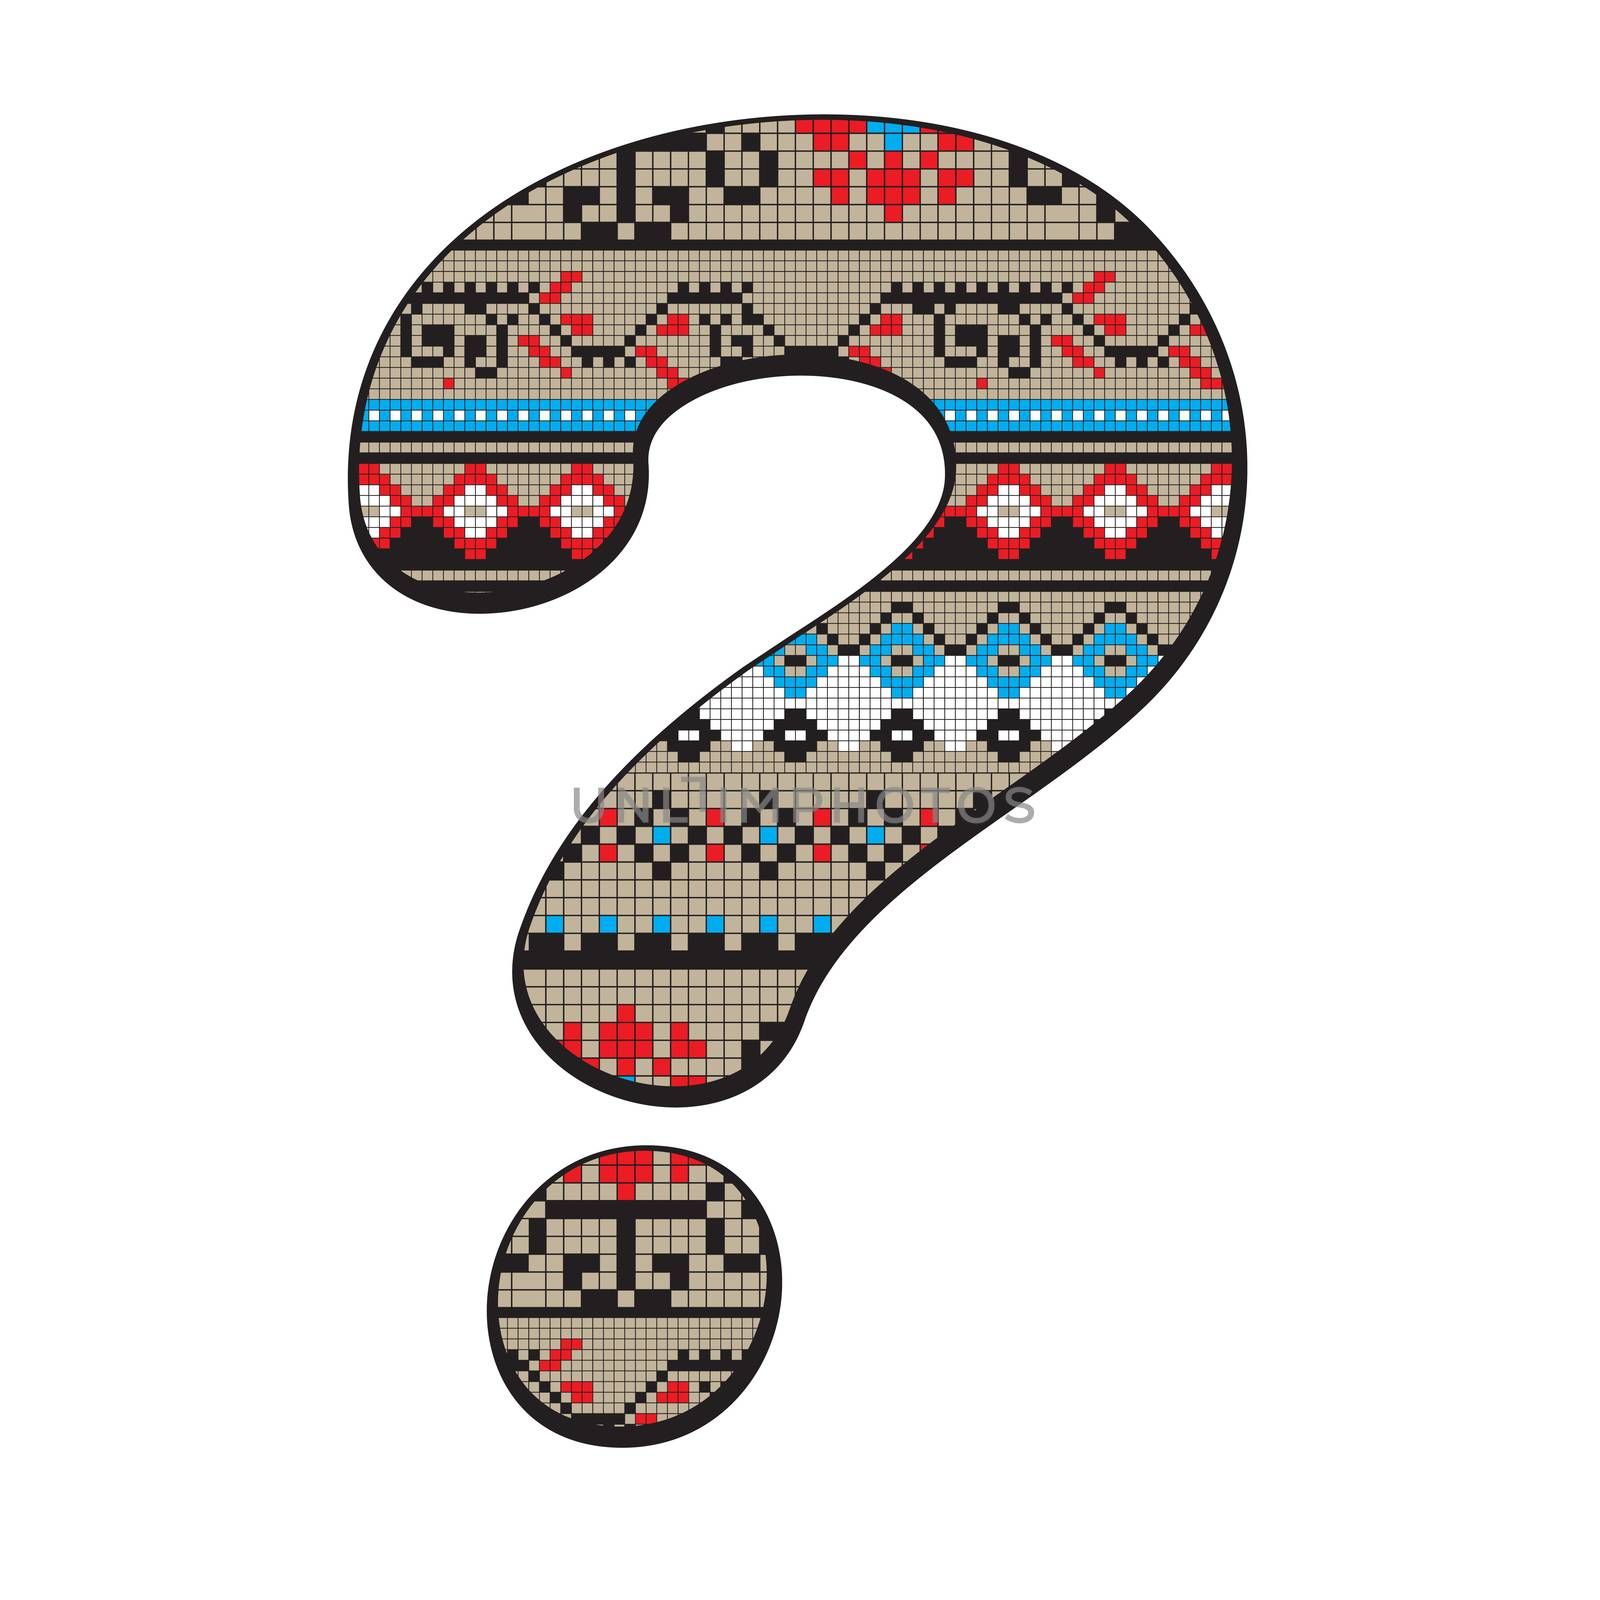 Decorated original font, pixel art ethnic model inspired by a Balkan motif over a funny question mark isolated on white